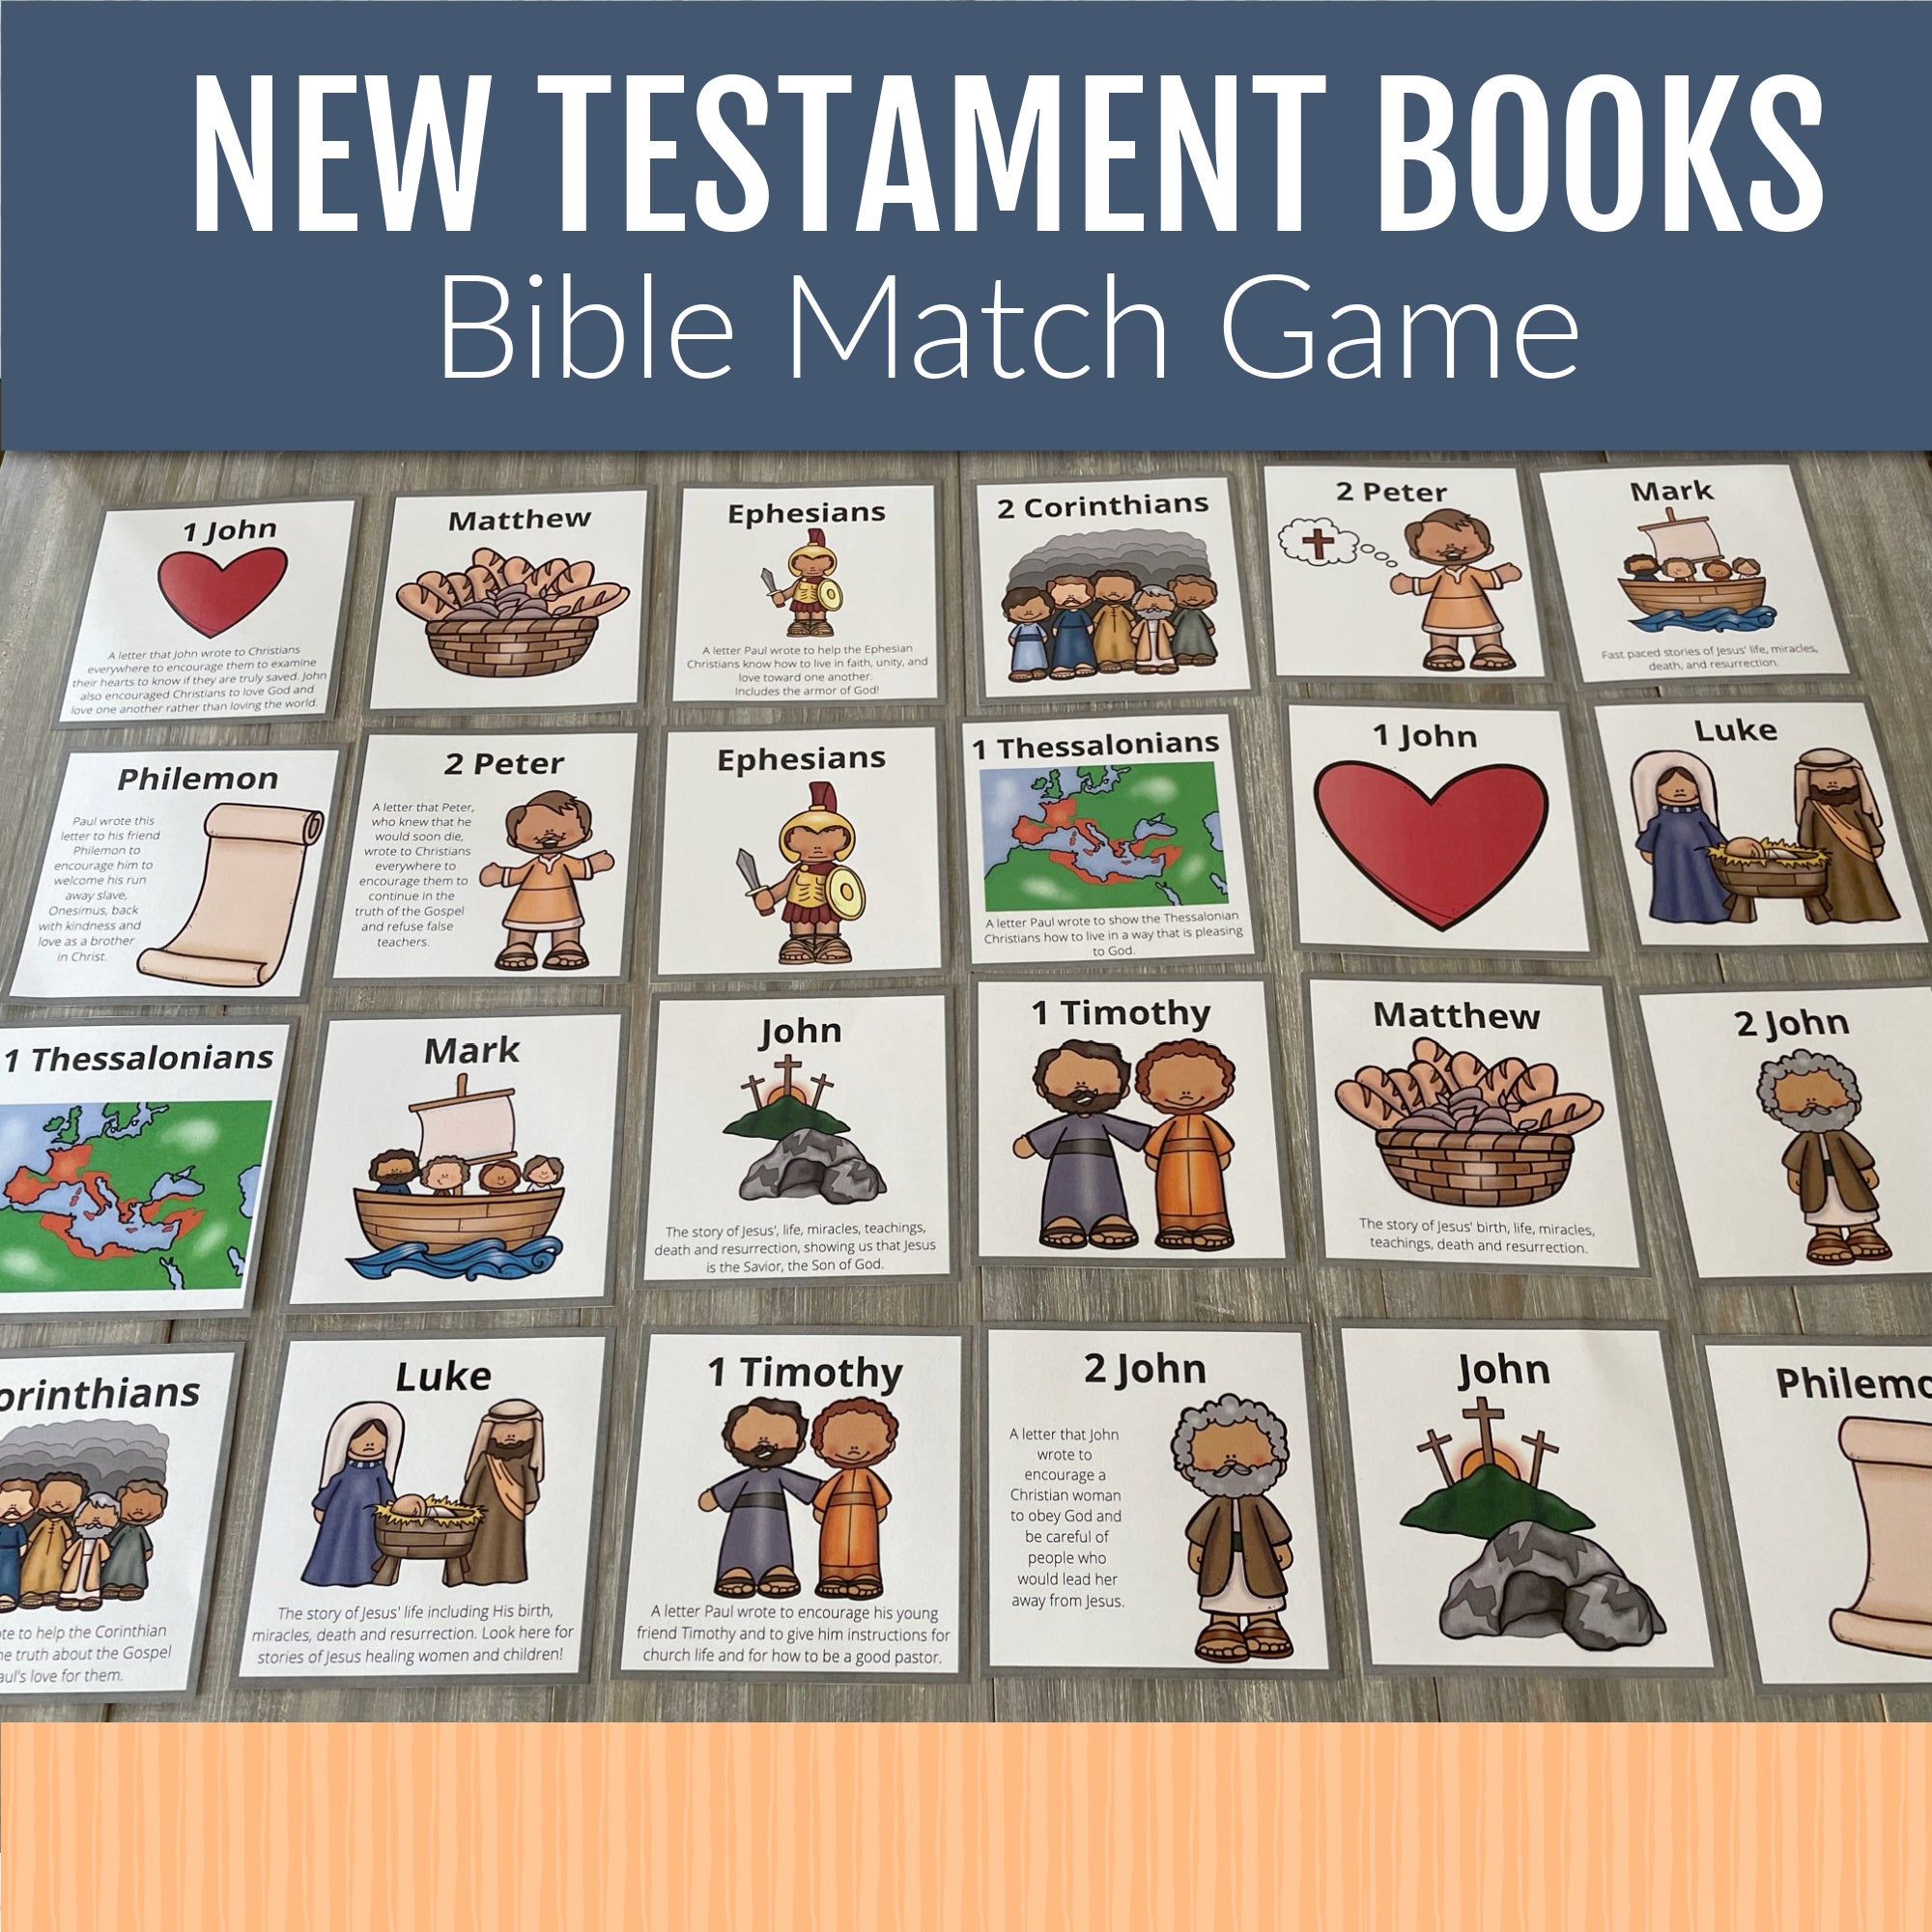 Bible Match Game - Bible Memory Game for New Testament Books of the Bible